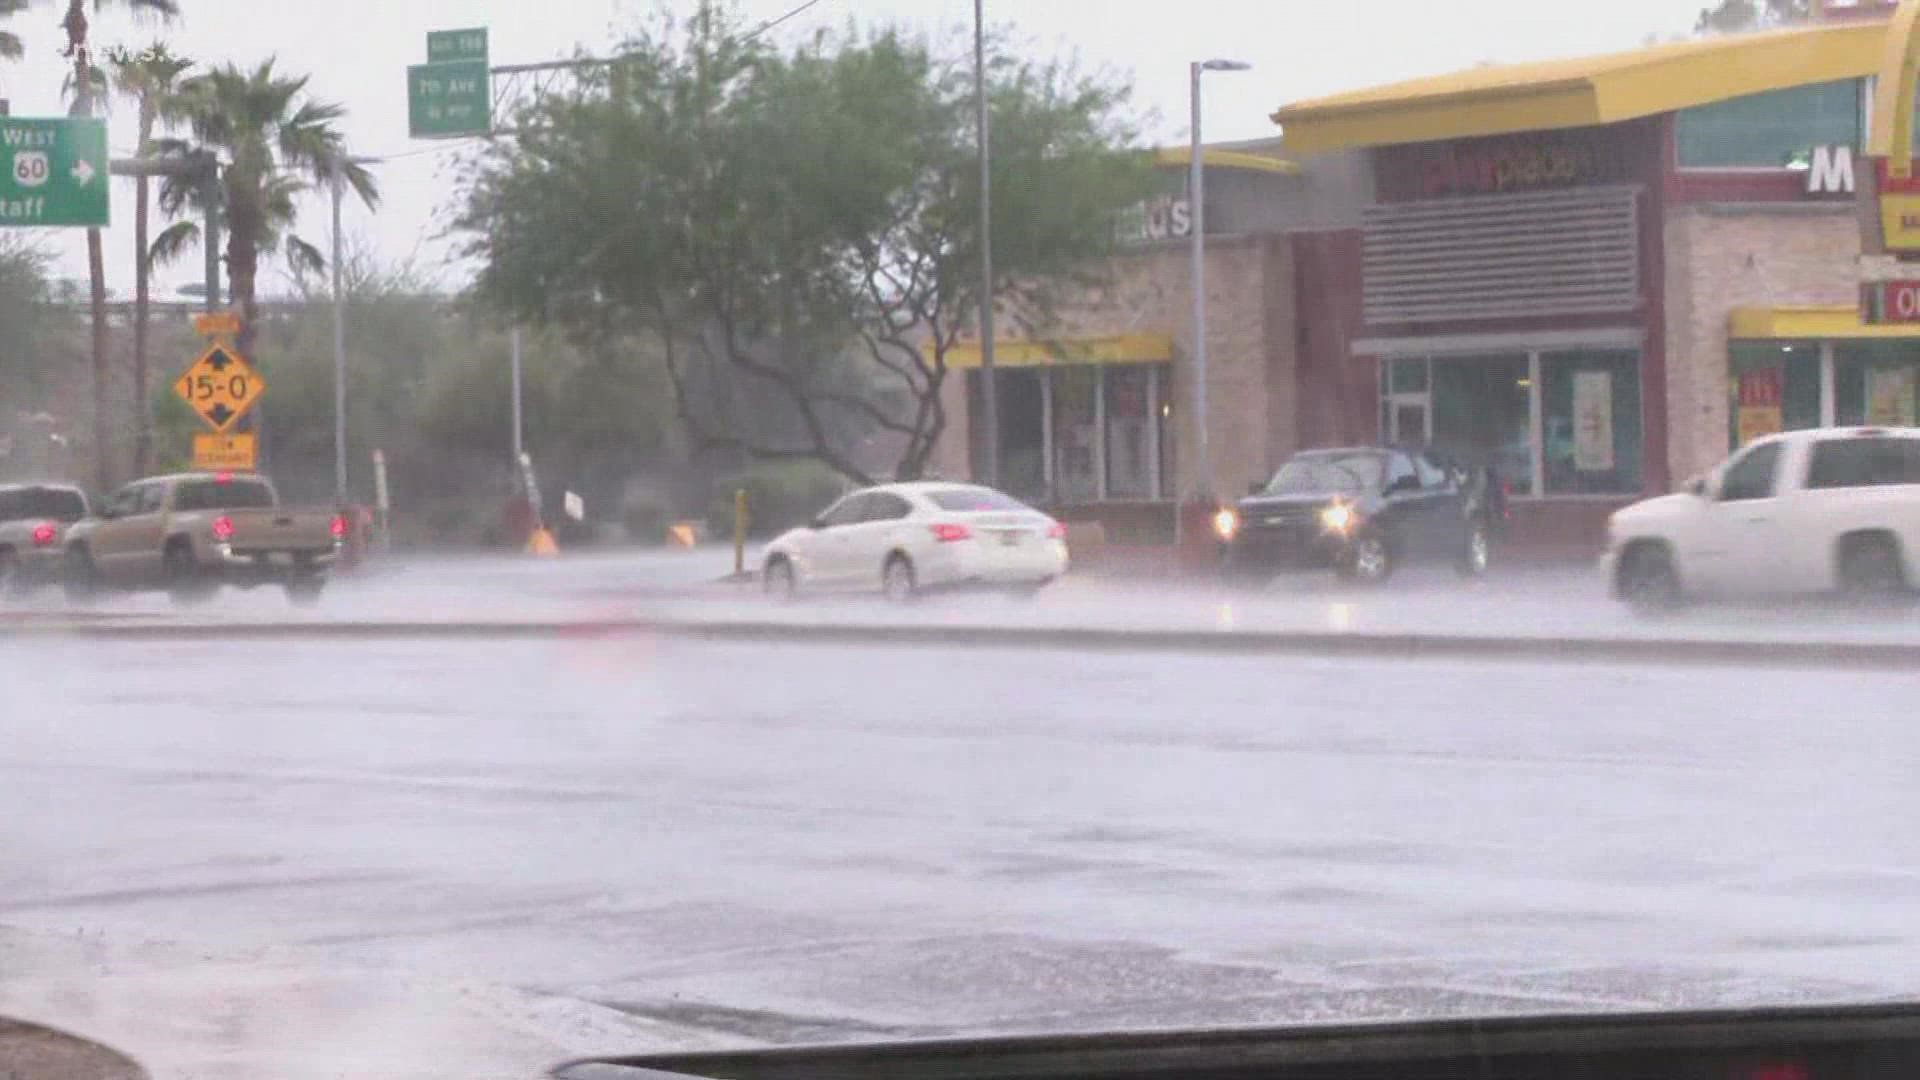 Fast-moving storms have been hitting Arizona all of Tuesday. A storm dumping heavy rain made its way into Phoenix on Tuesday evening.